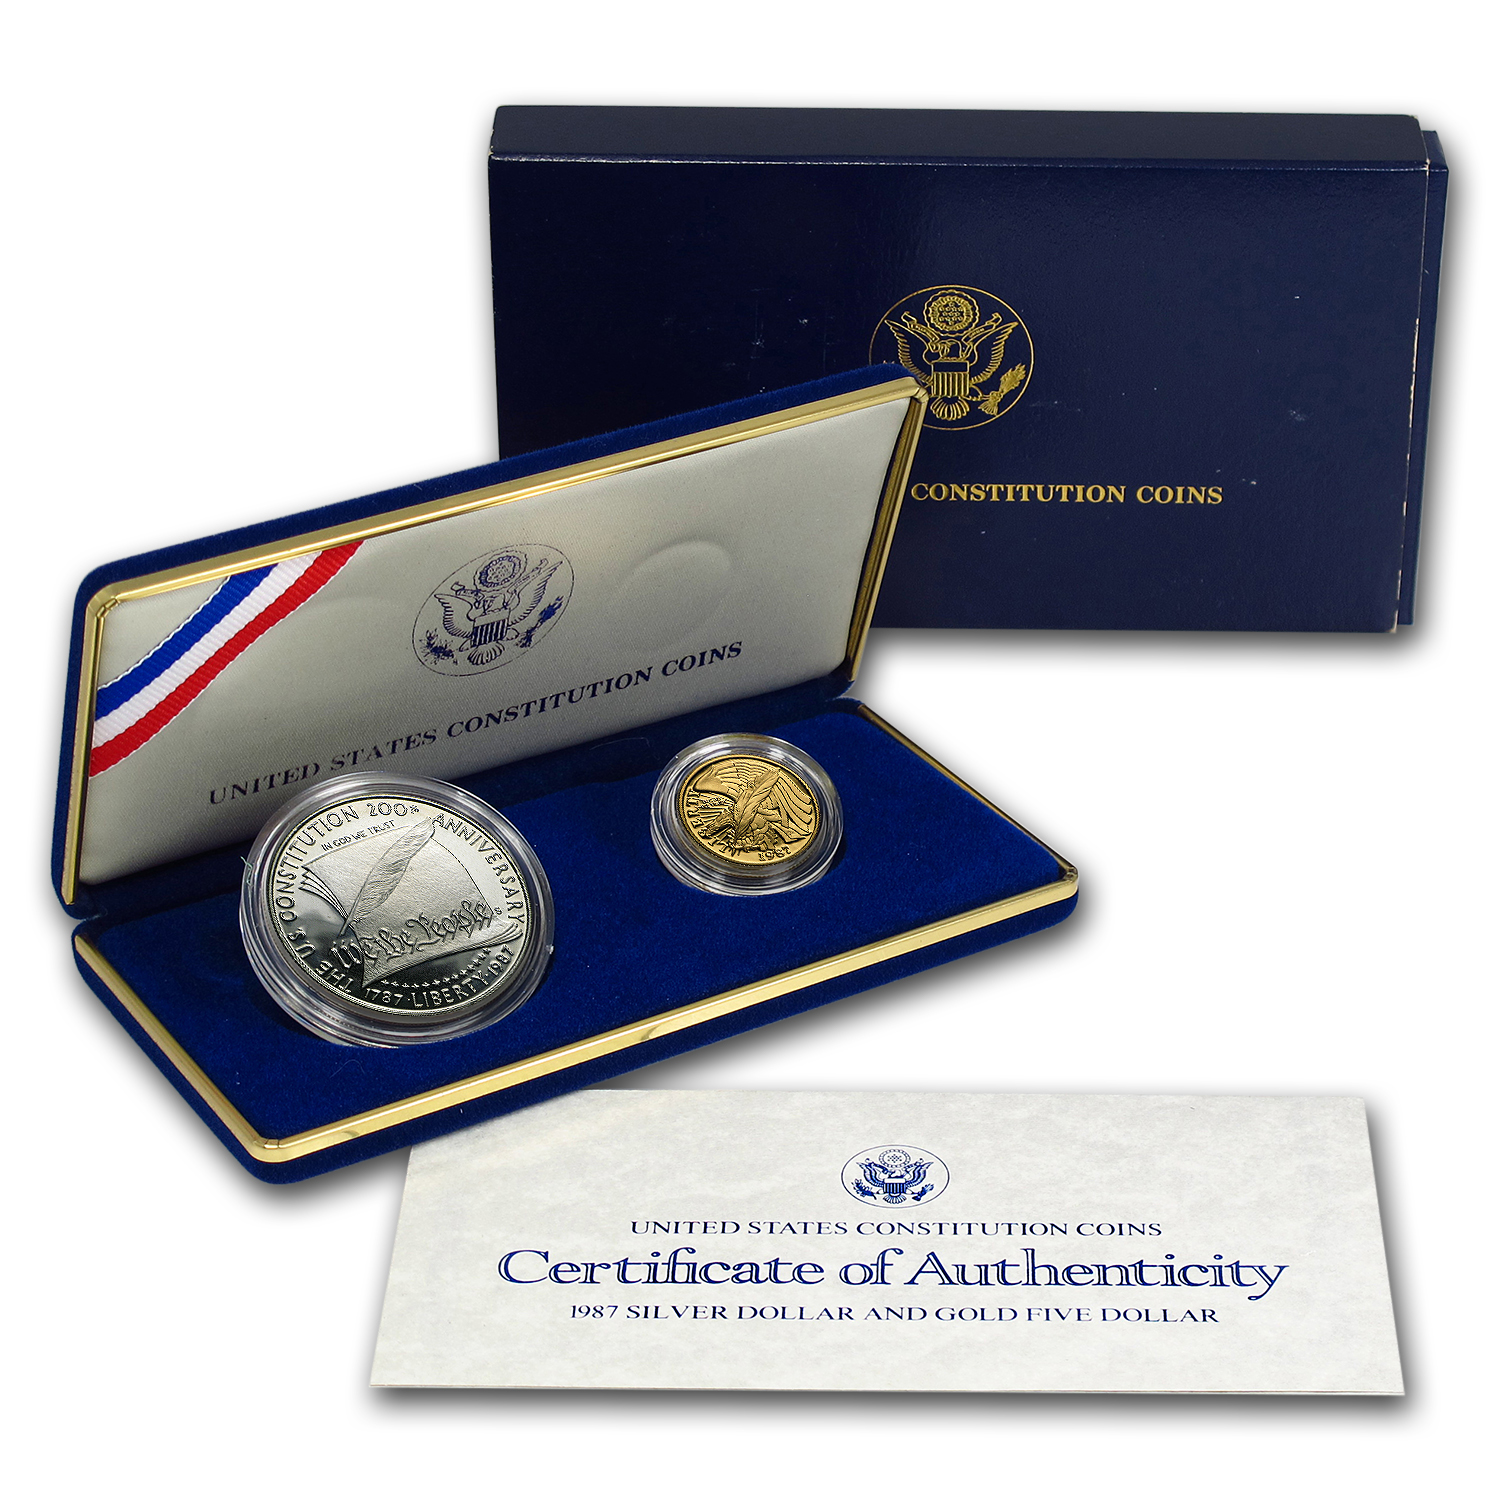 UNITED STATES CONSTITUTION COINS - その他